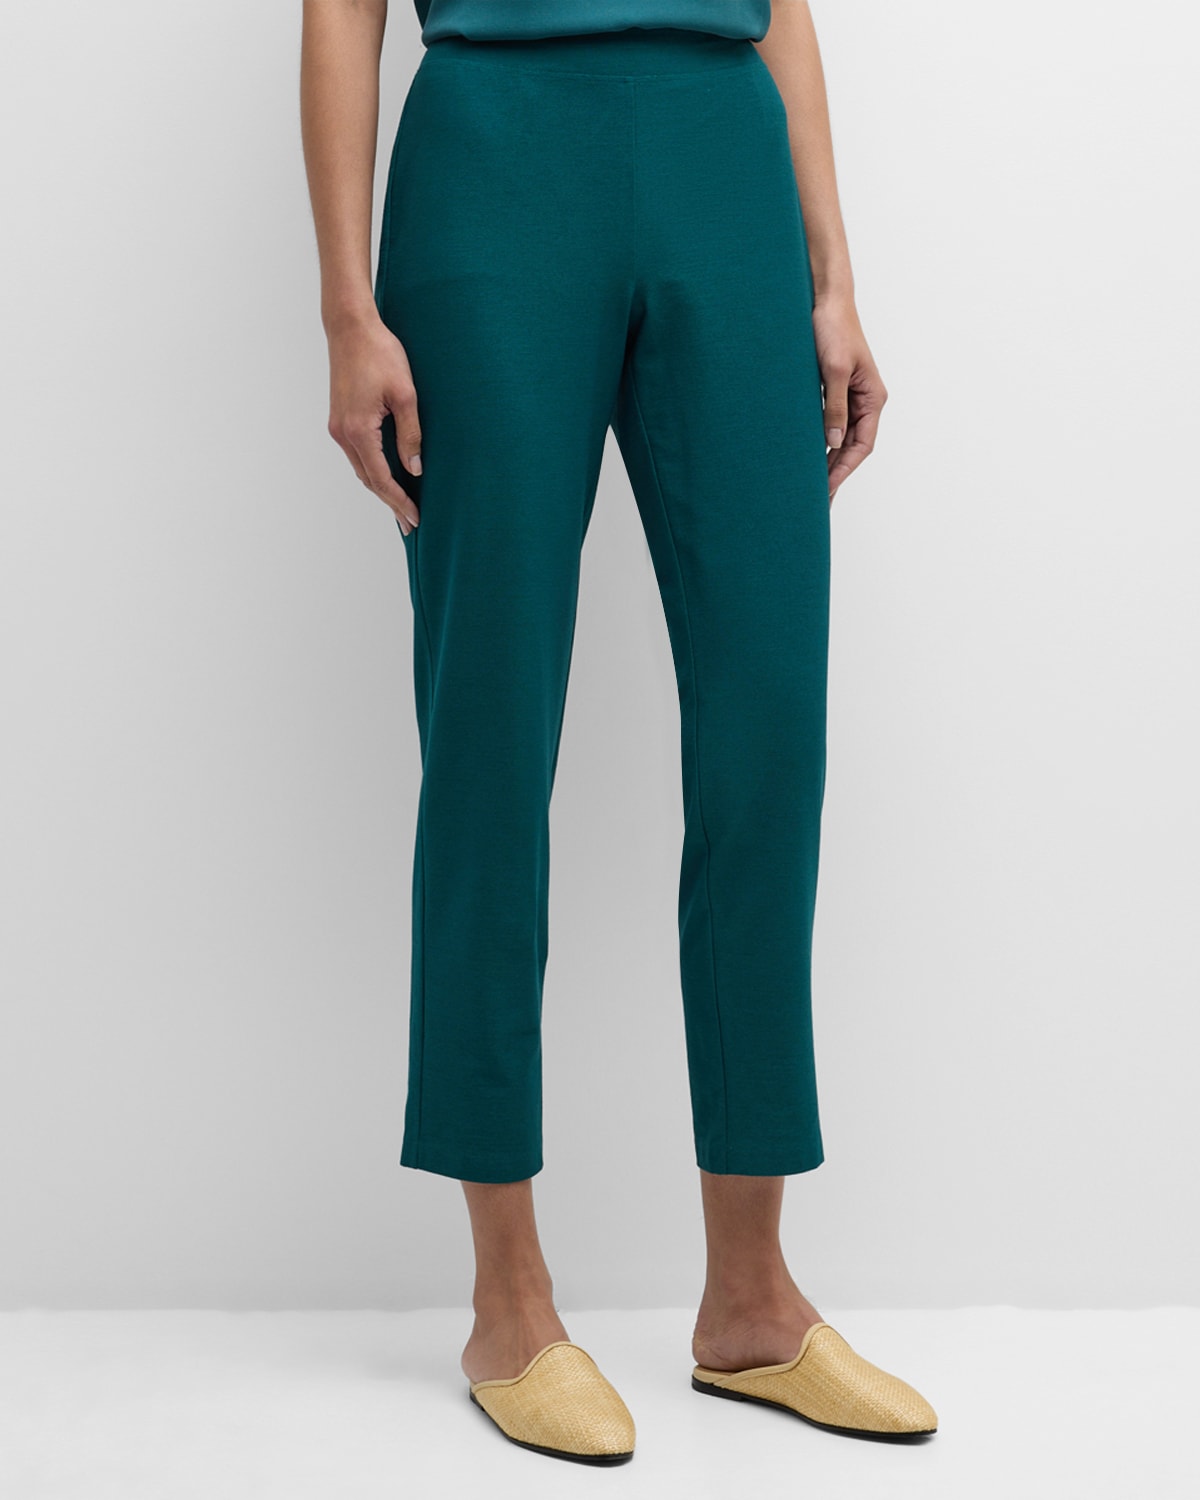 Cropped Stretch Crepe Skinny Pants